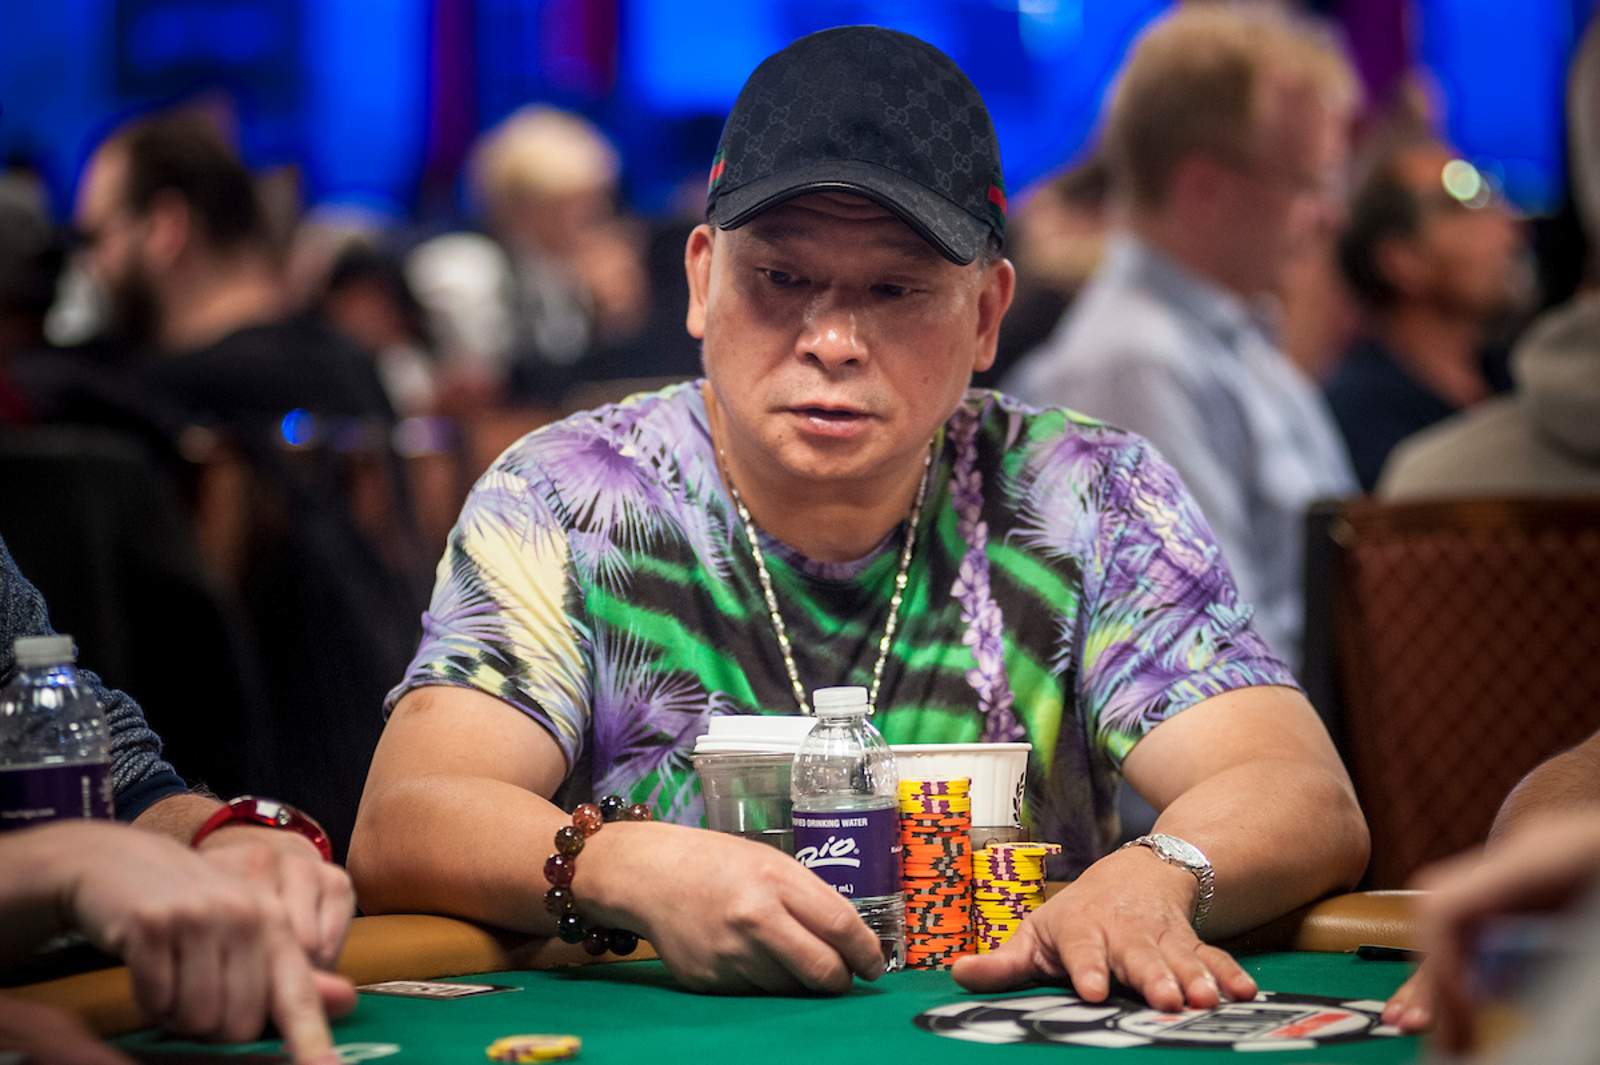 Pokerography on PokerGO Features Johnny Chan